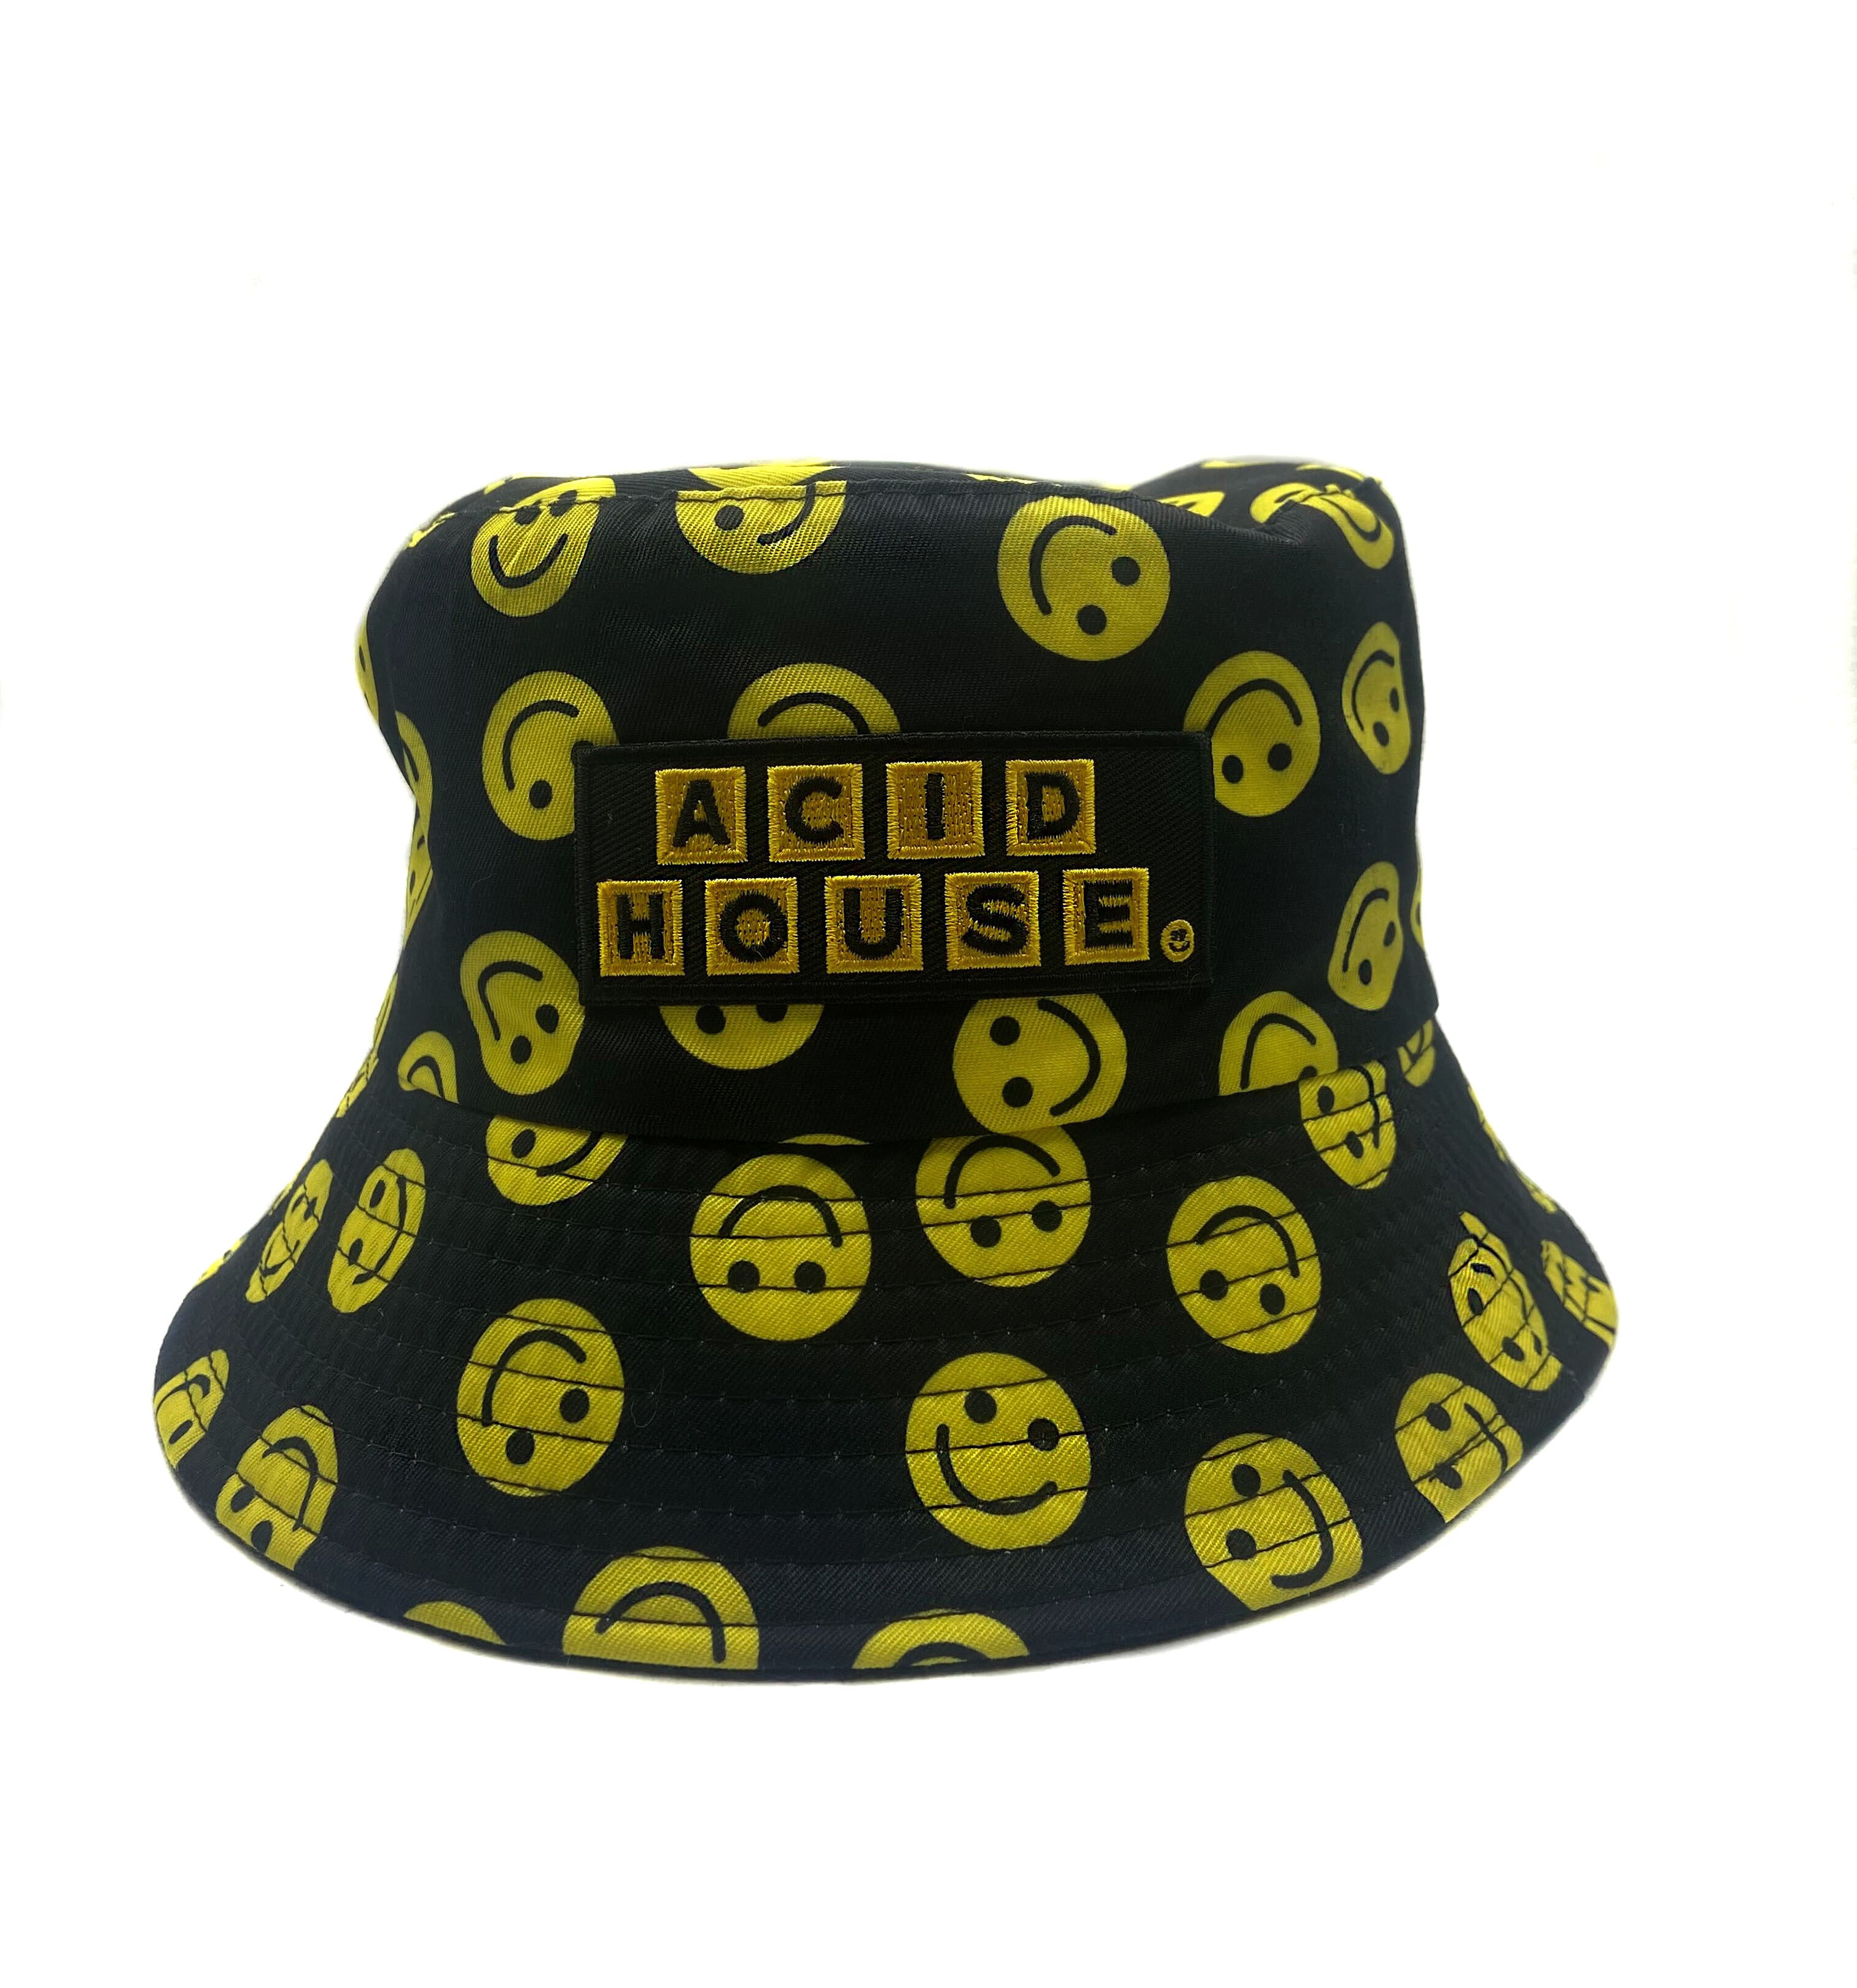 Smiley Face Bucket Hats, Well Done Goods